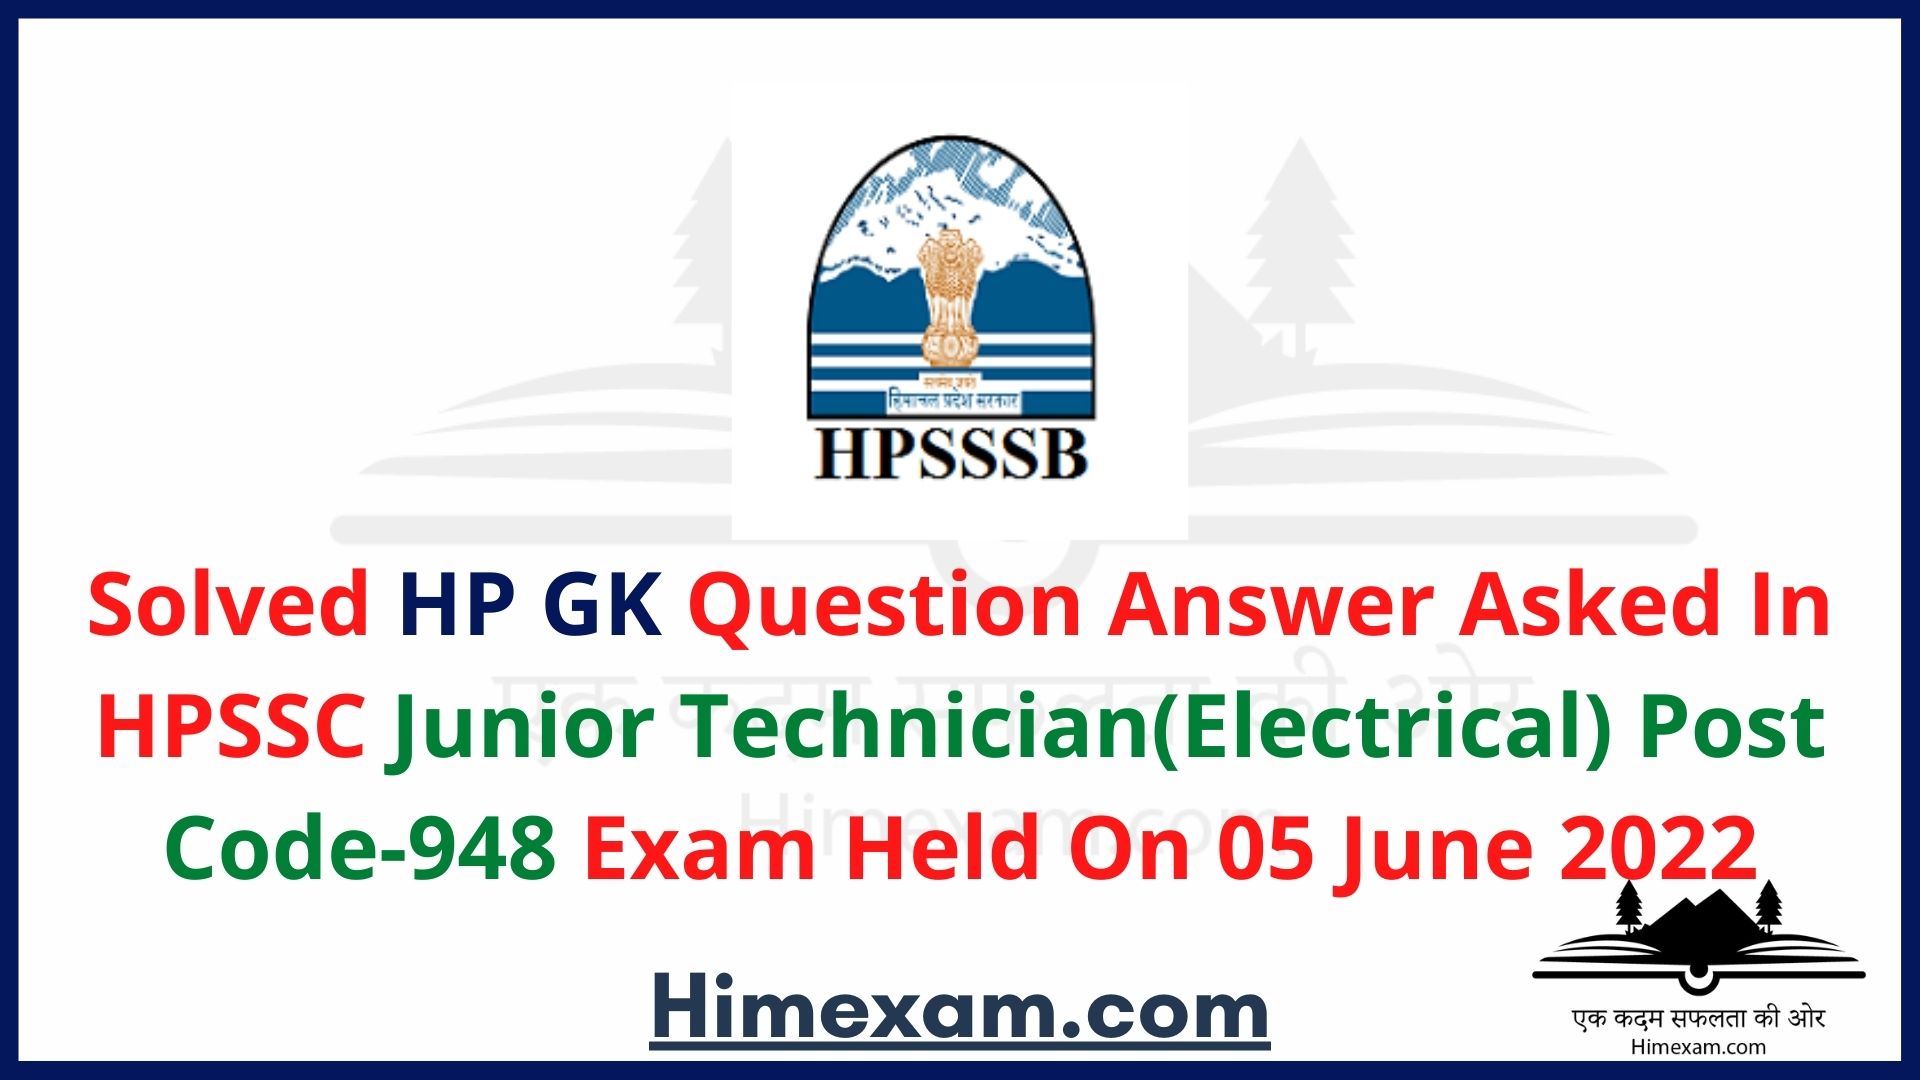 Solved HP GK Question Answer Asked In HPSSC Junior Technician(Electrical) Post Code-948 Exam Held On 05 June 2022